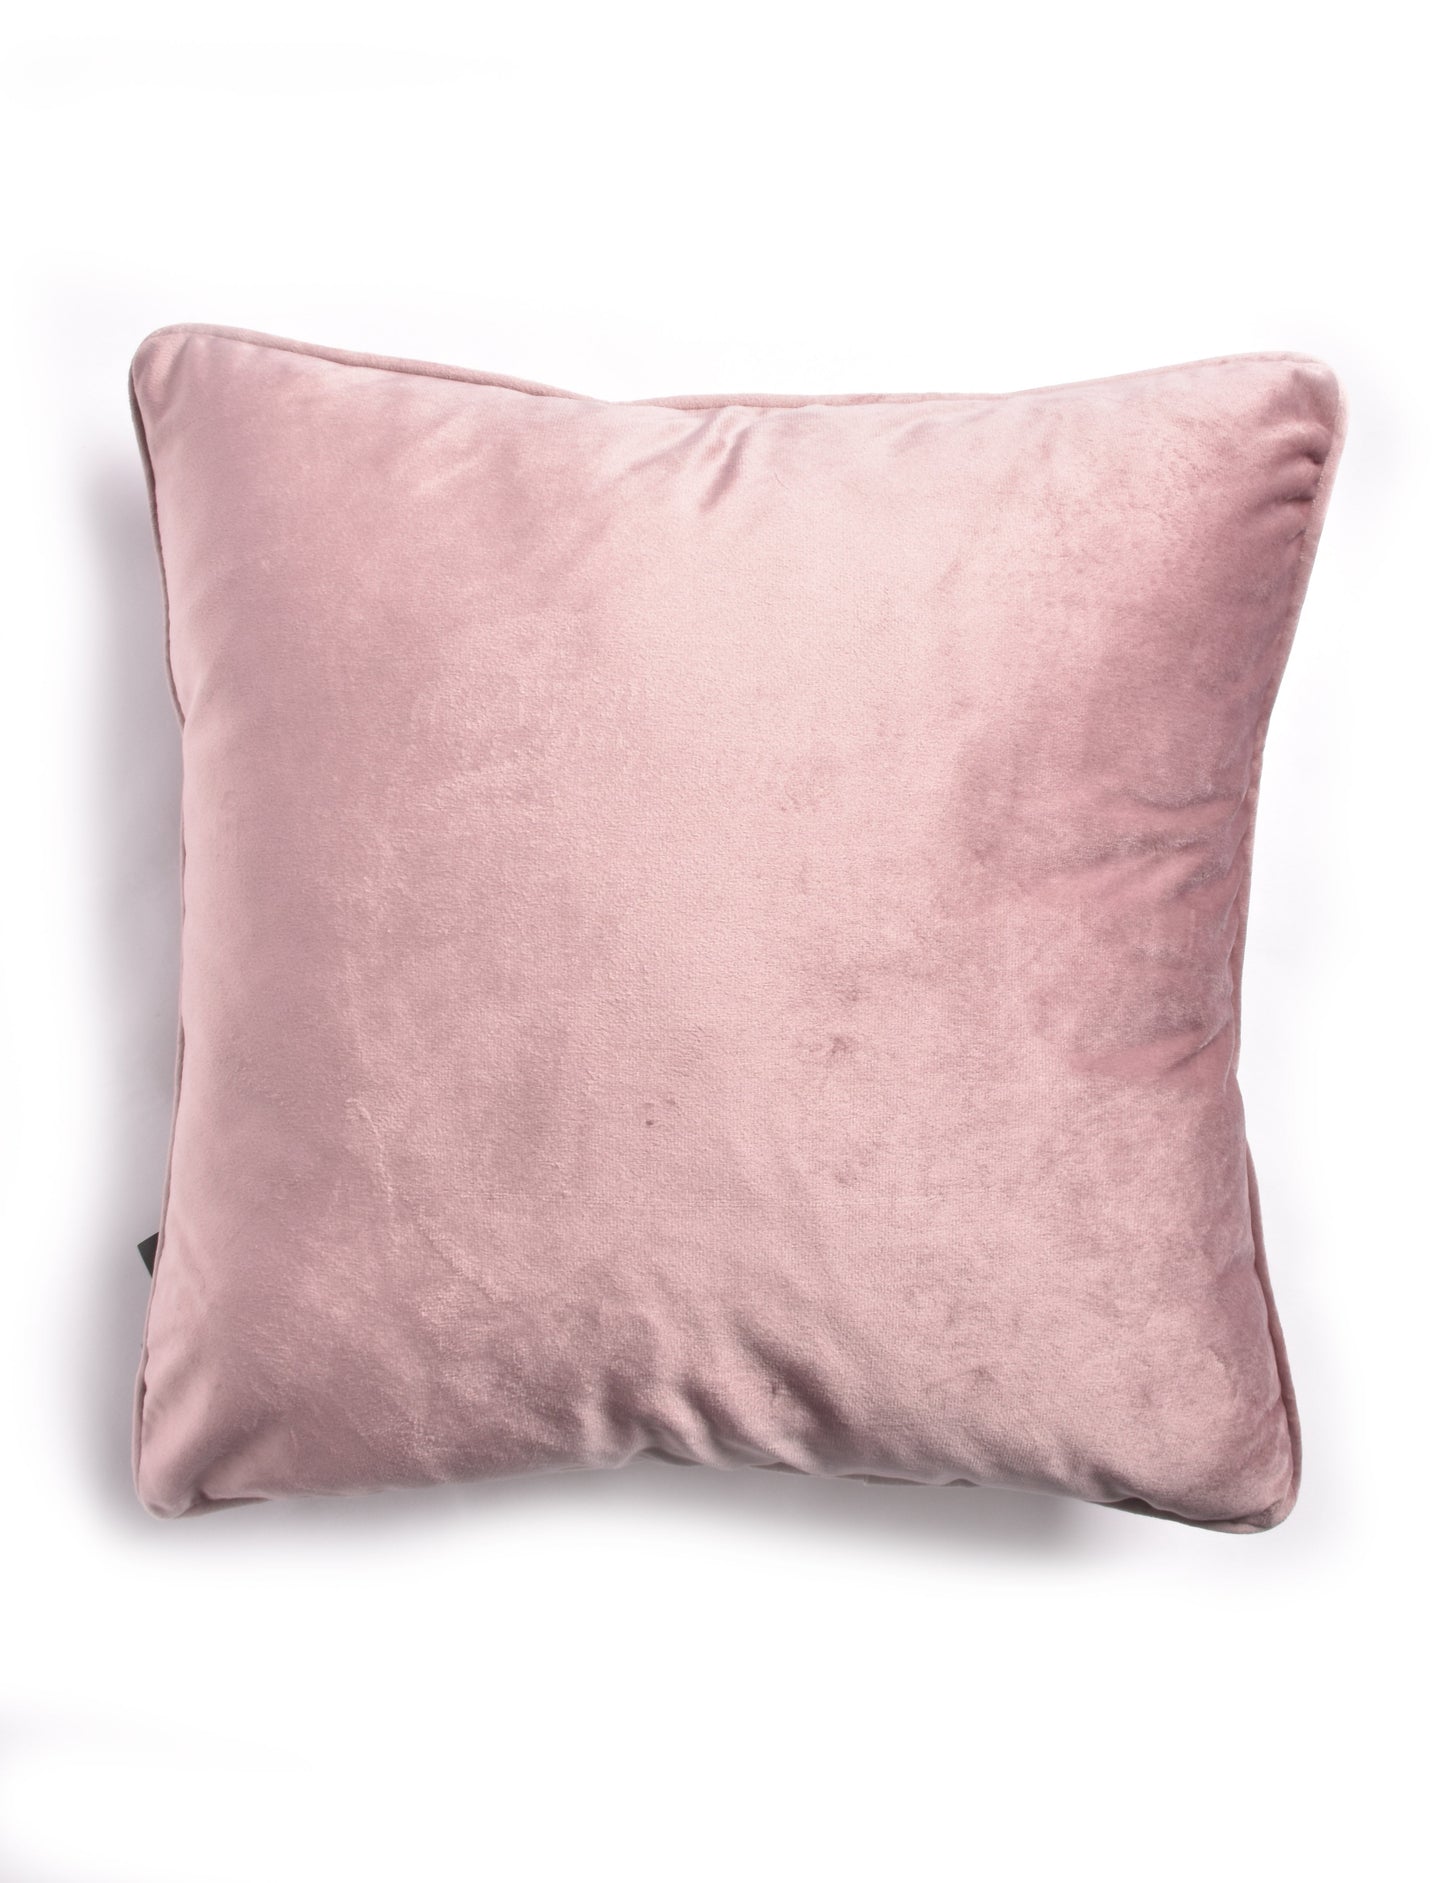 French Velvet Piped Cushion Cover - Blush